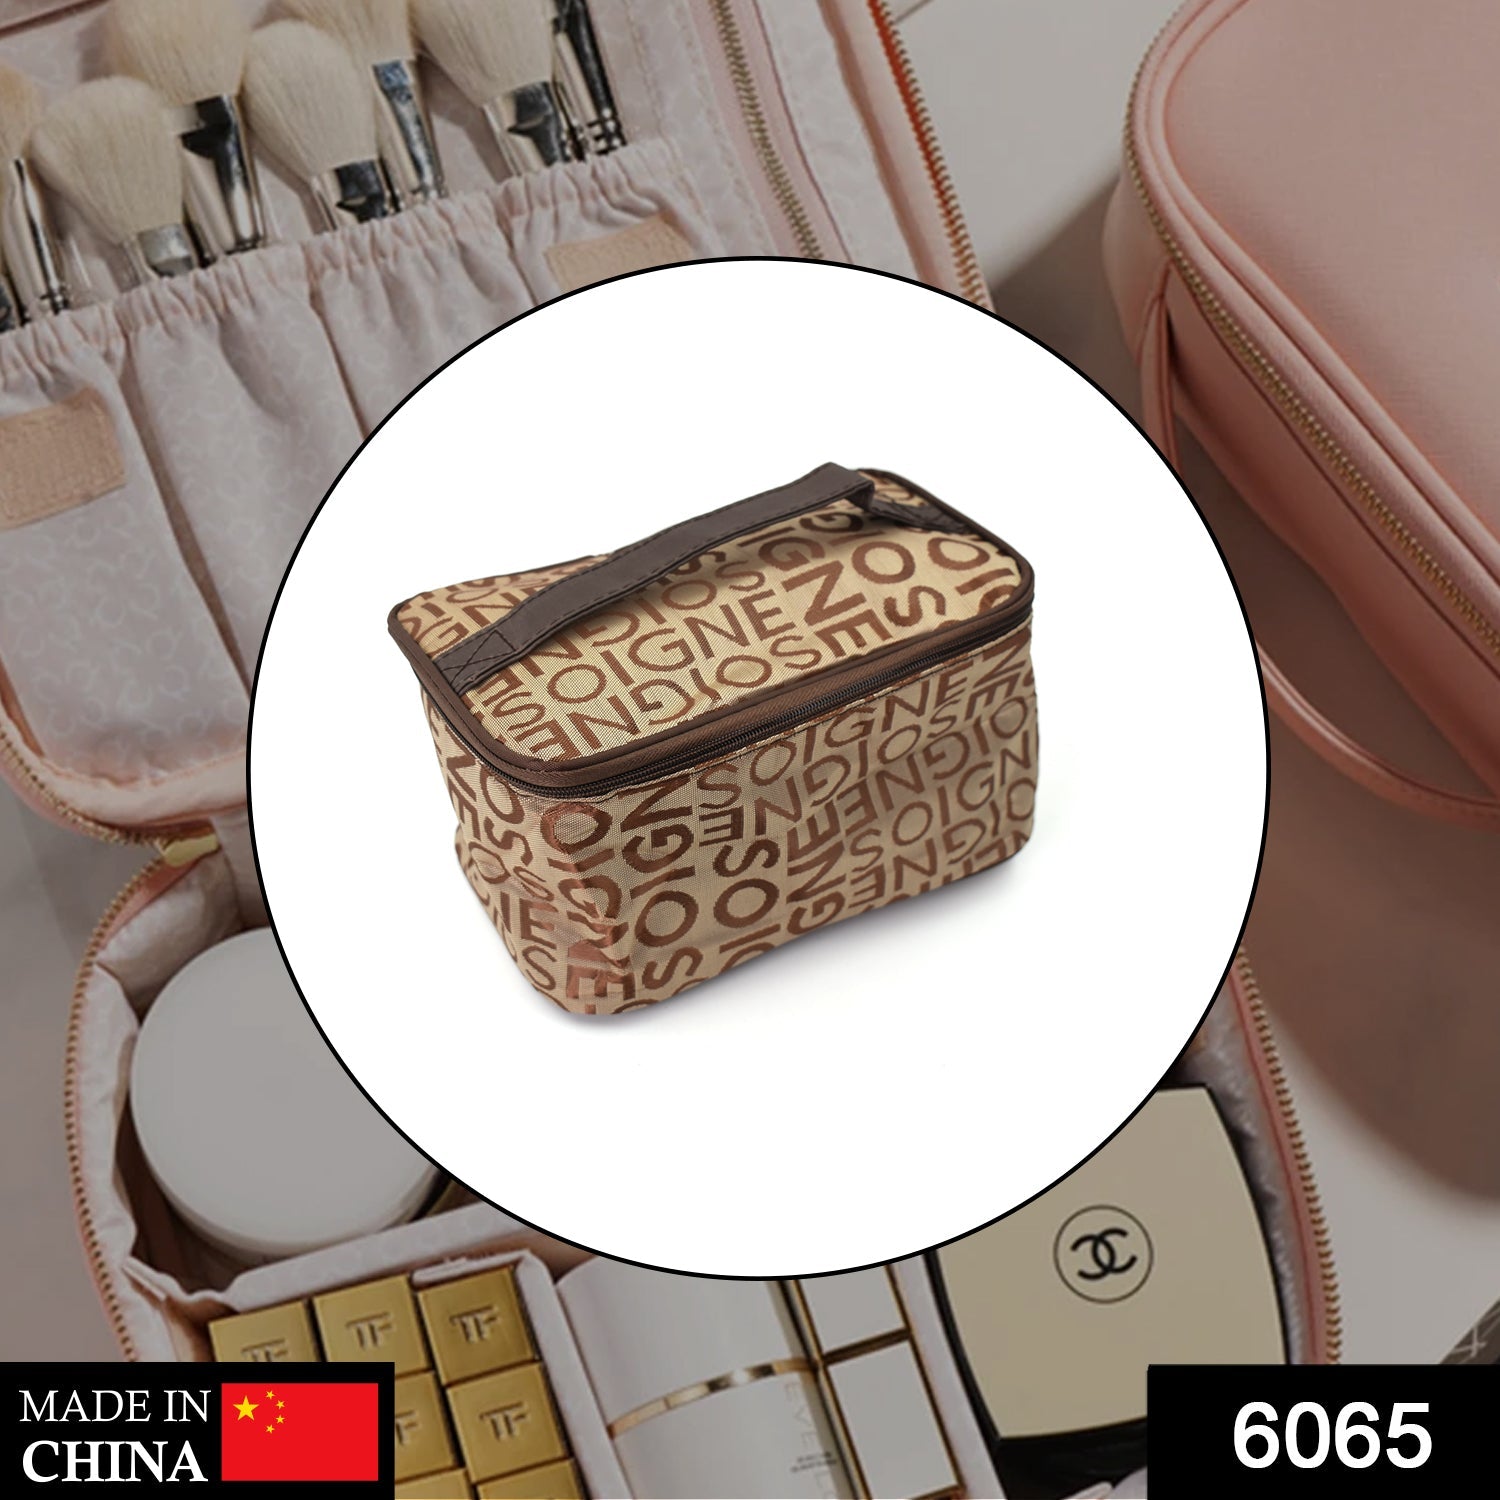 6065 Portable Makeup Bag widely used by women for storing their makeup equipment and all while travelling and moving. DeoDap